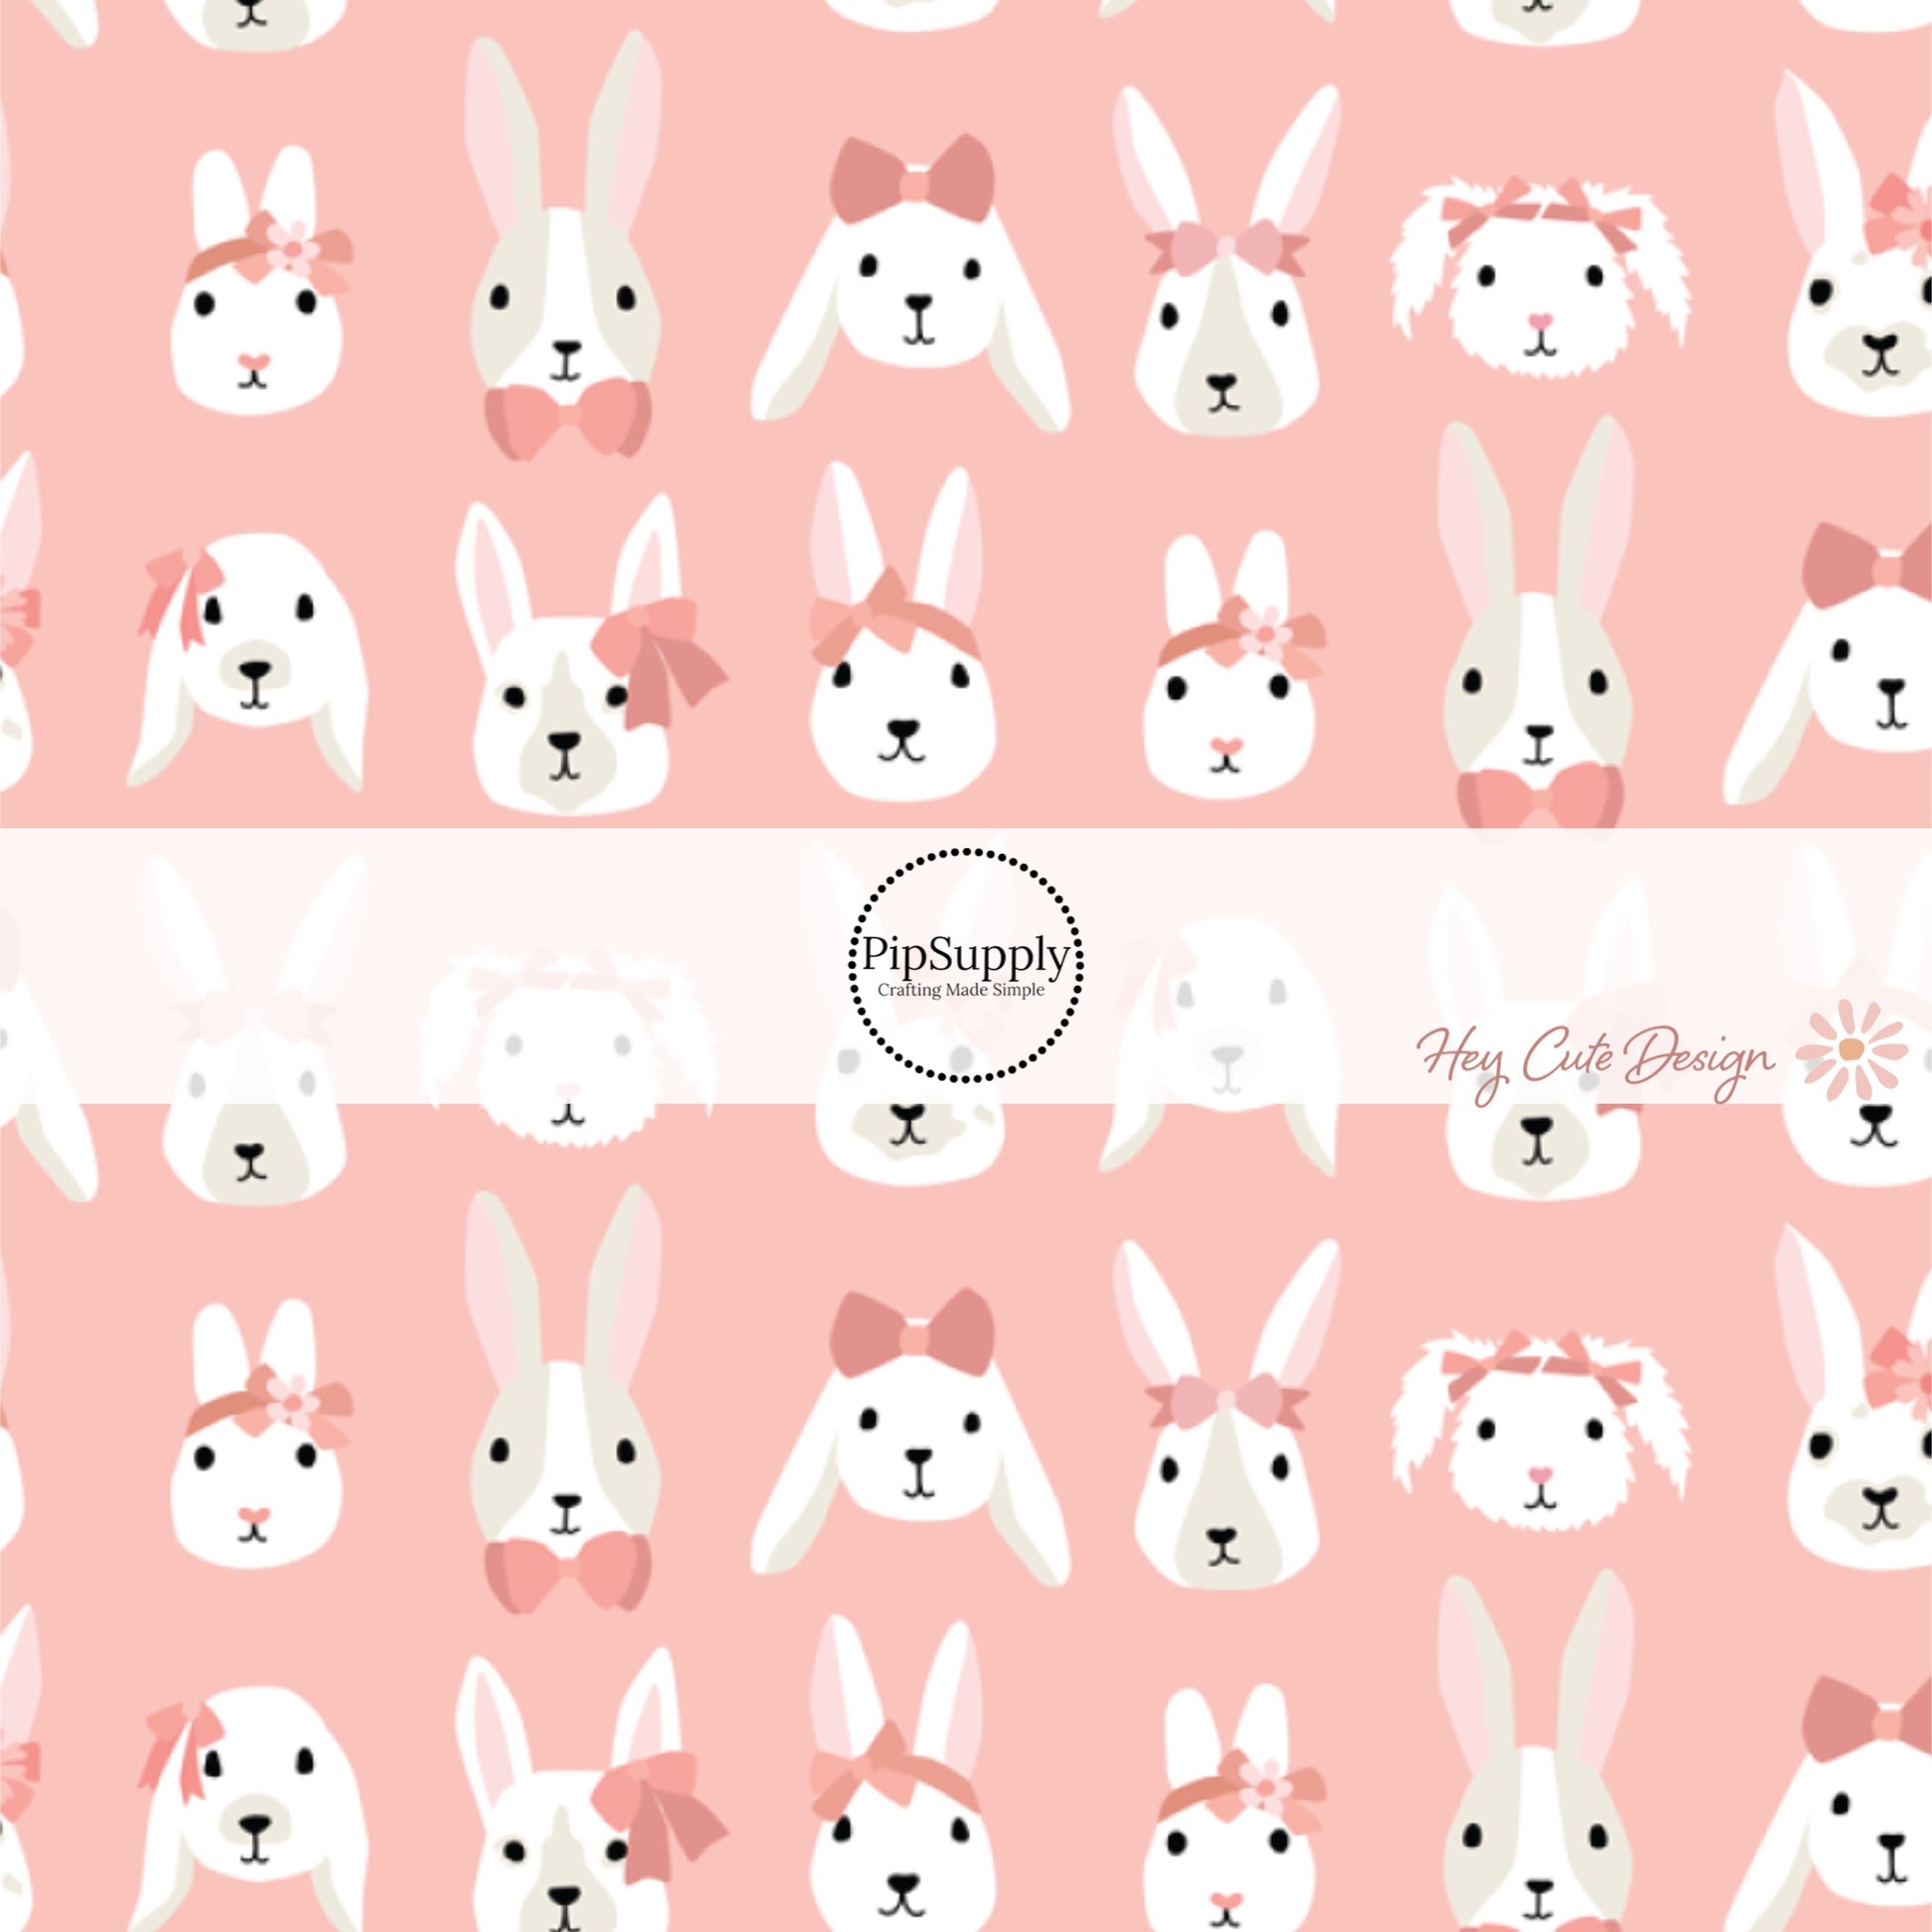 This summer fabric by the yard features bunnies with bows on pink. This fun themed fabric can be used for all your sewing and crafting needs!